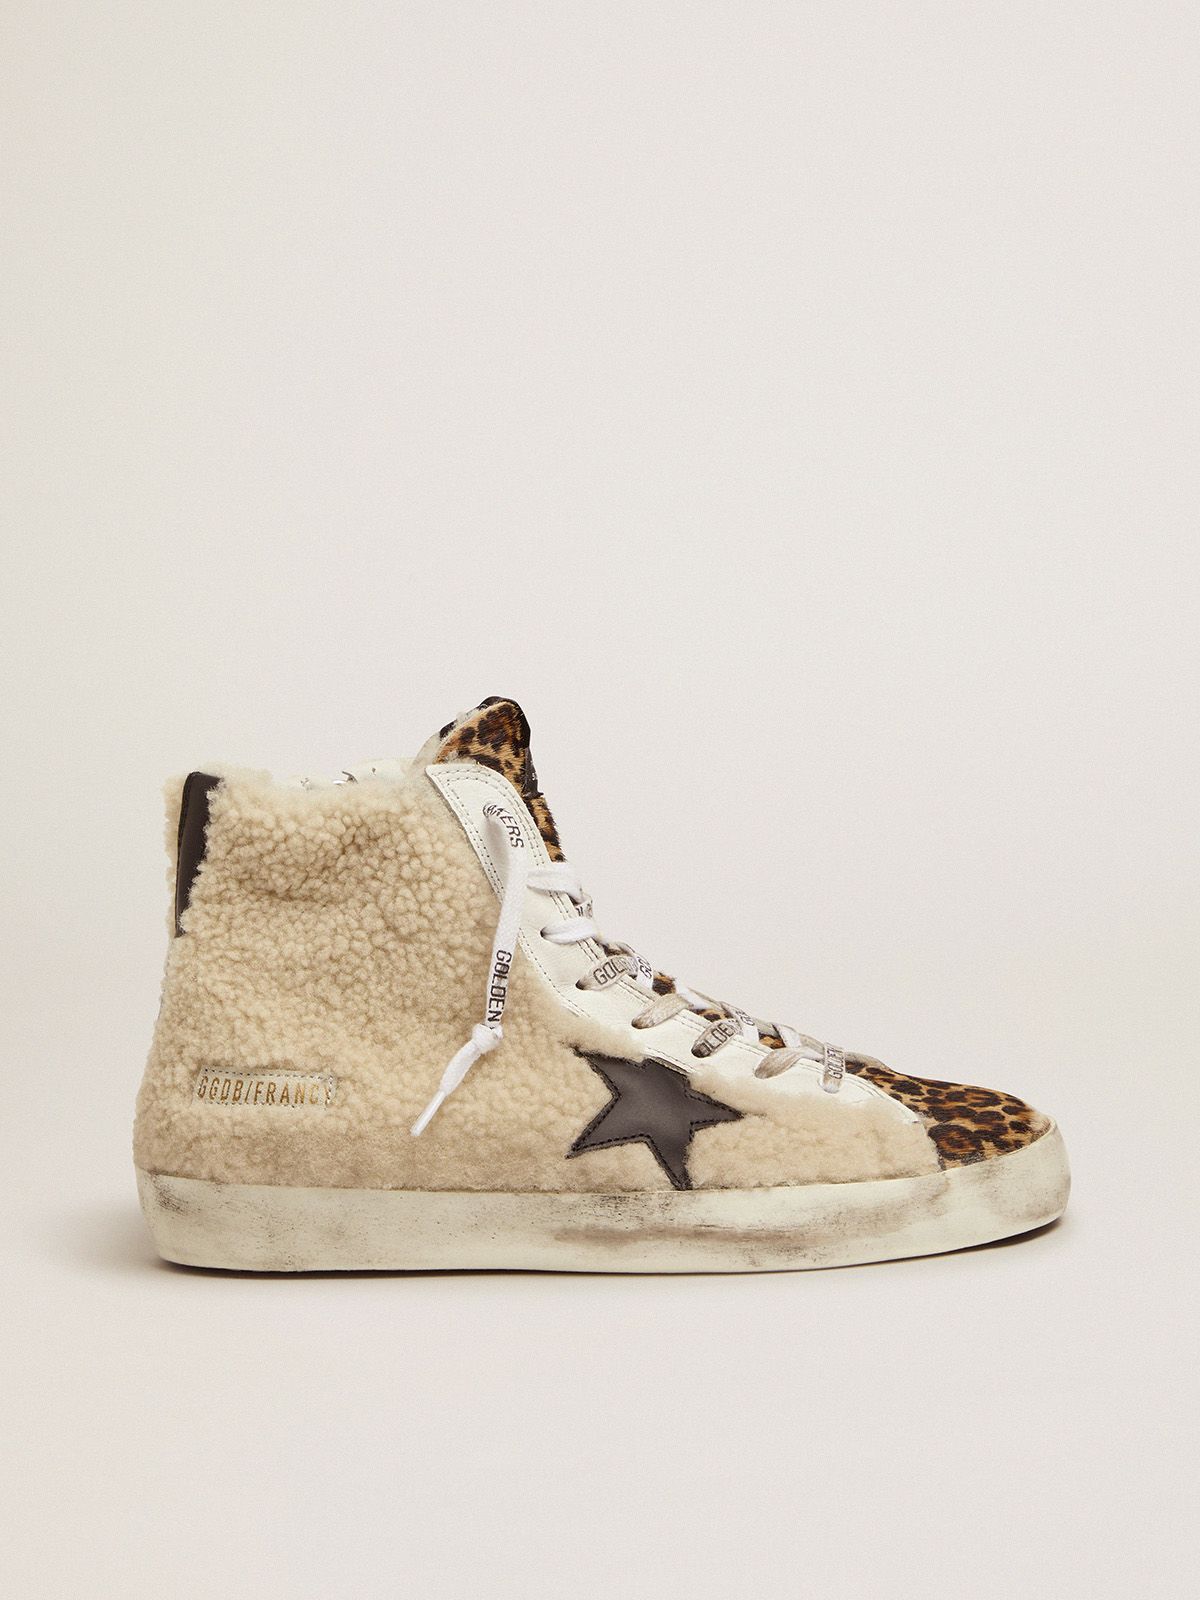 Golden Goose Uomo Saldi Francy sneakers made of shearling and pony skin with a leopard print